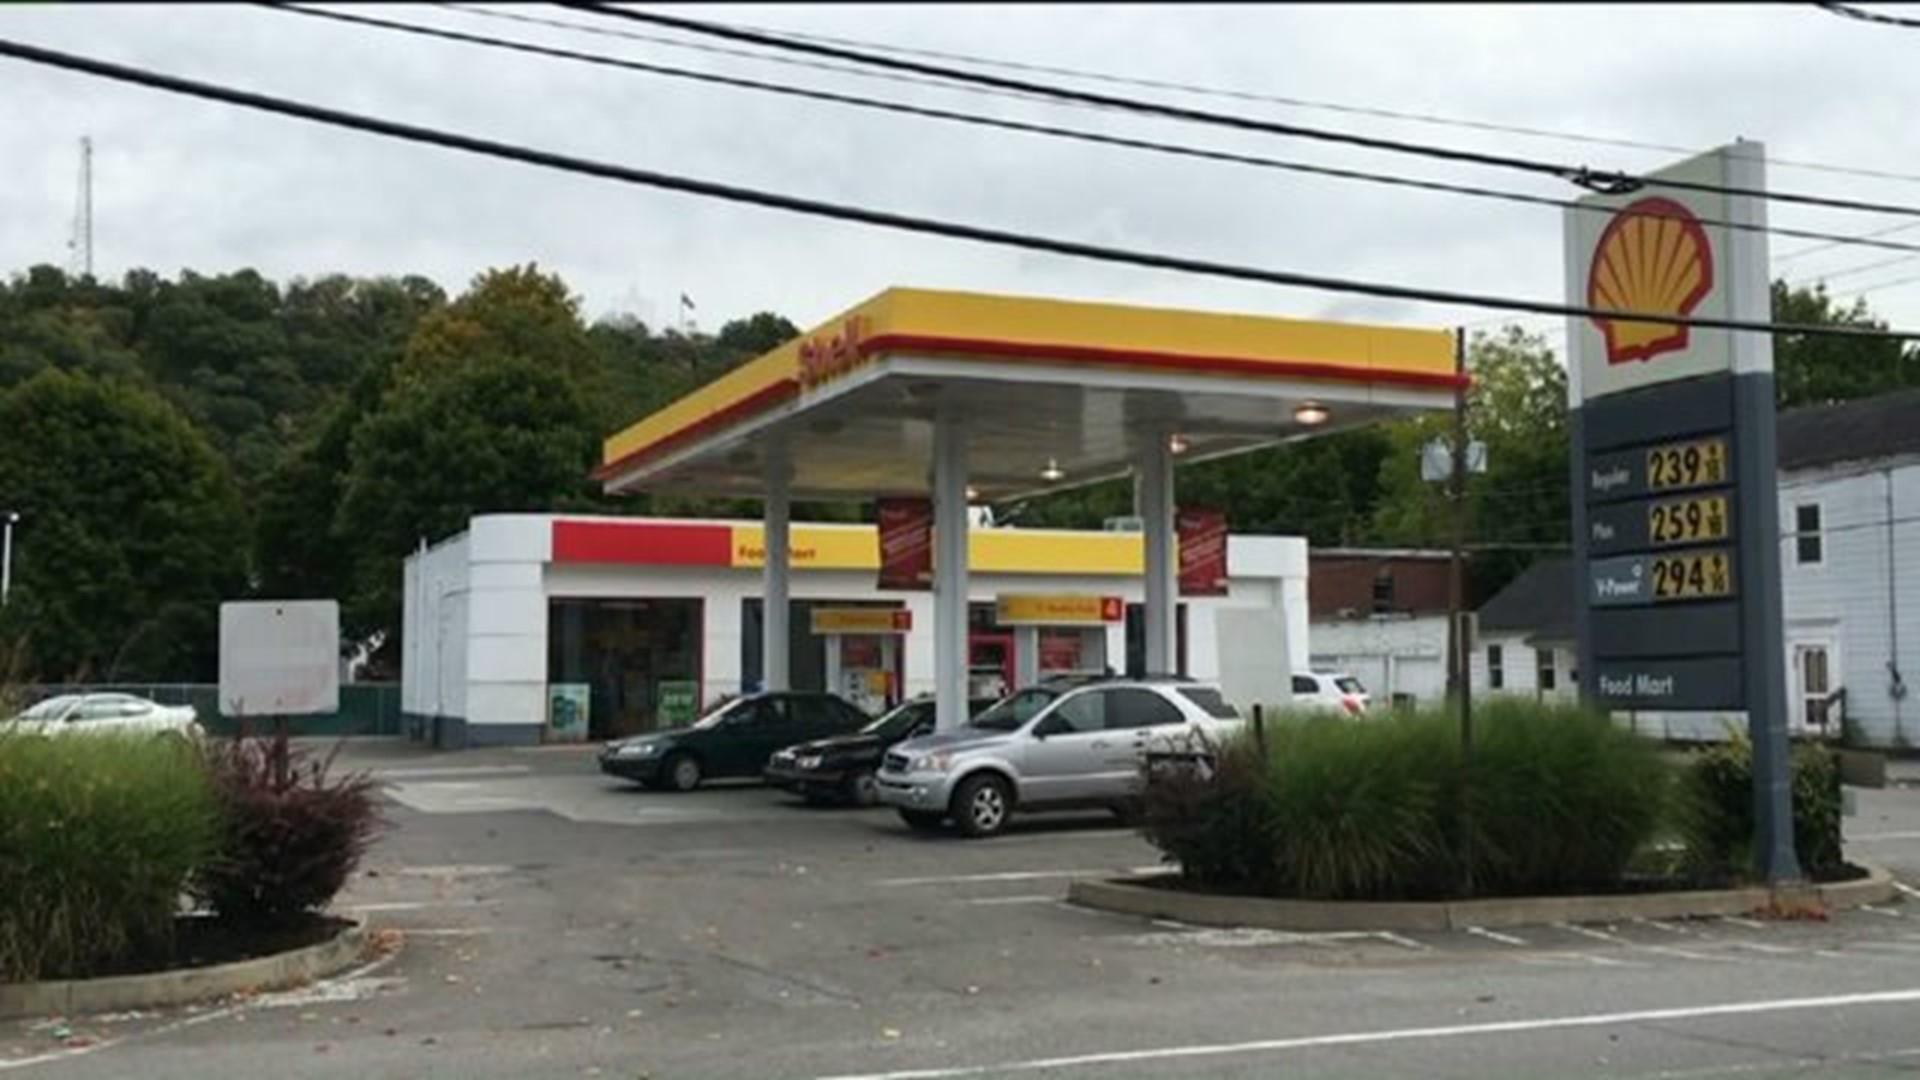 Employee Accused of Stealing Thousands of Dollars from Gas Station